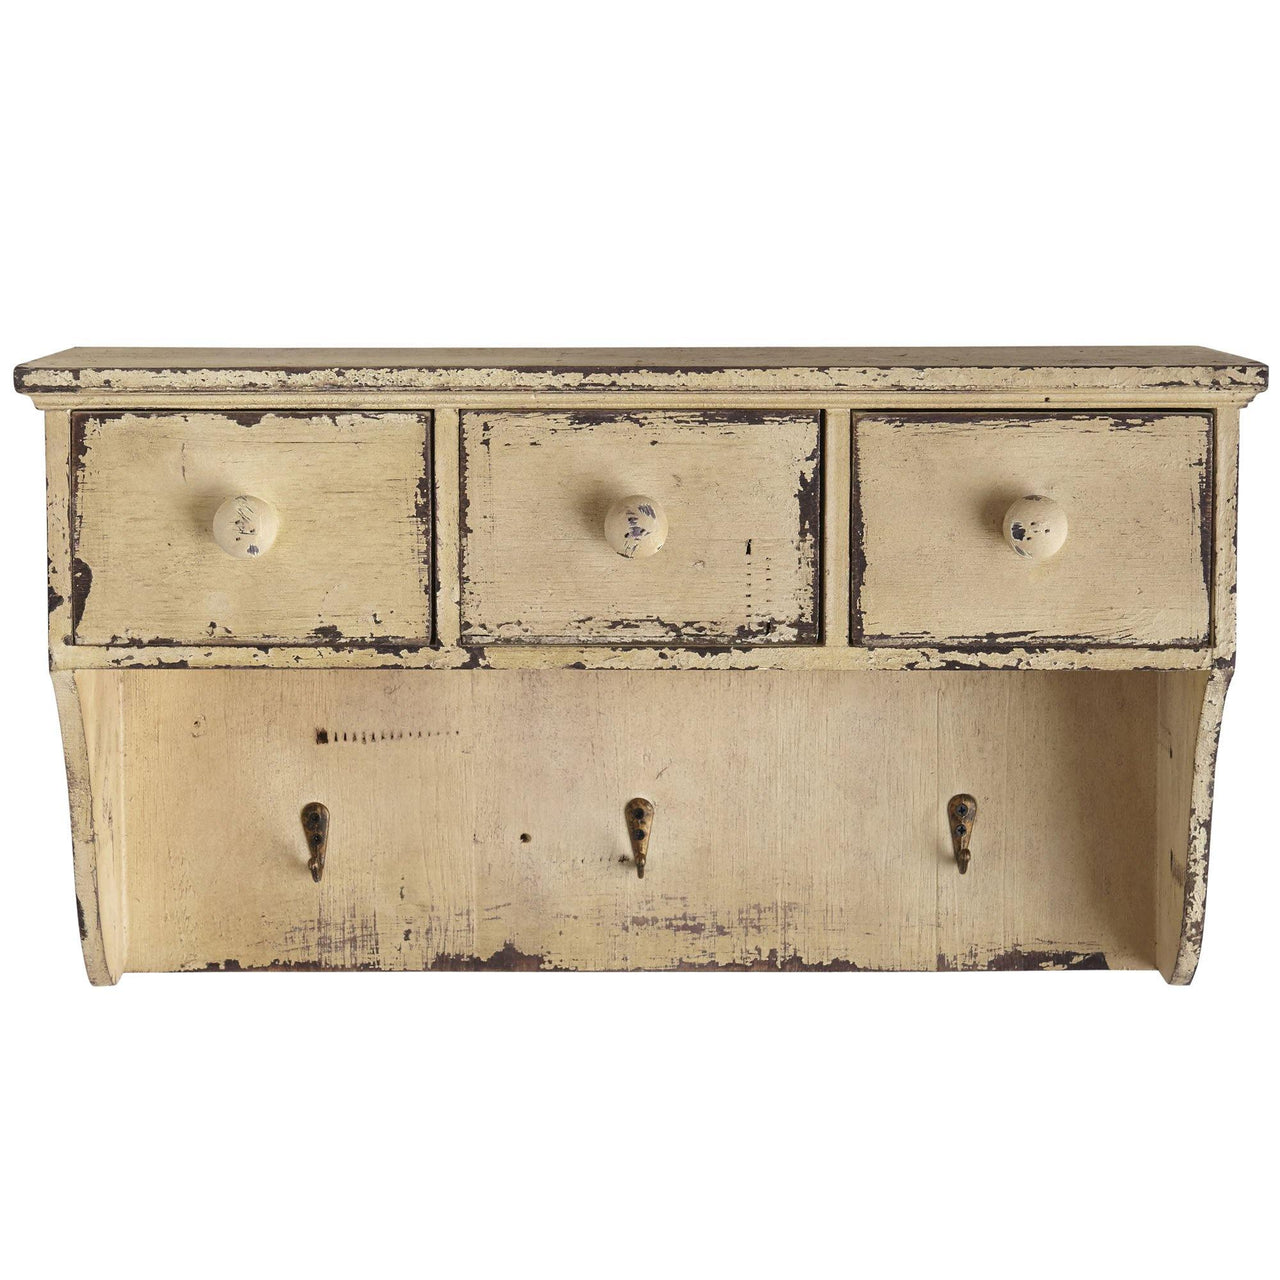 Distressed Wooden Shelf With Drawers And Hooks - The Fox Decor